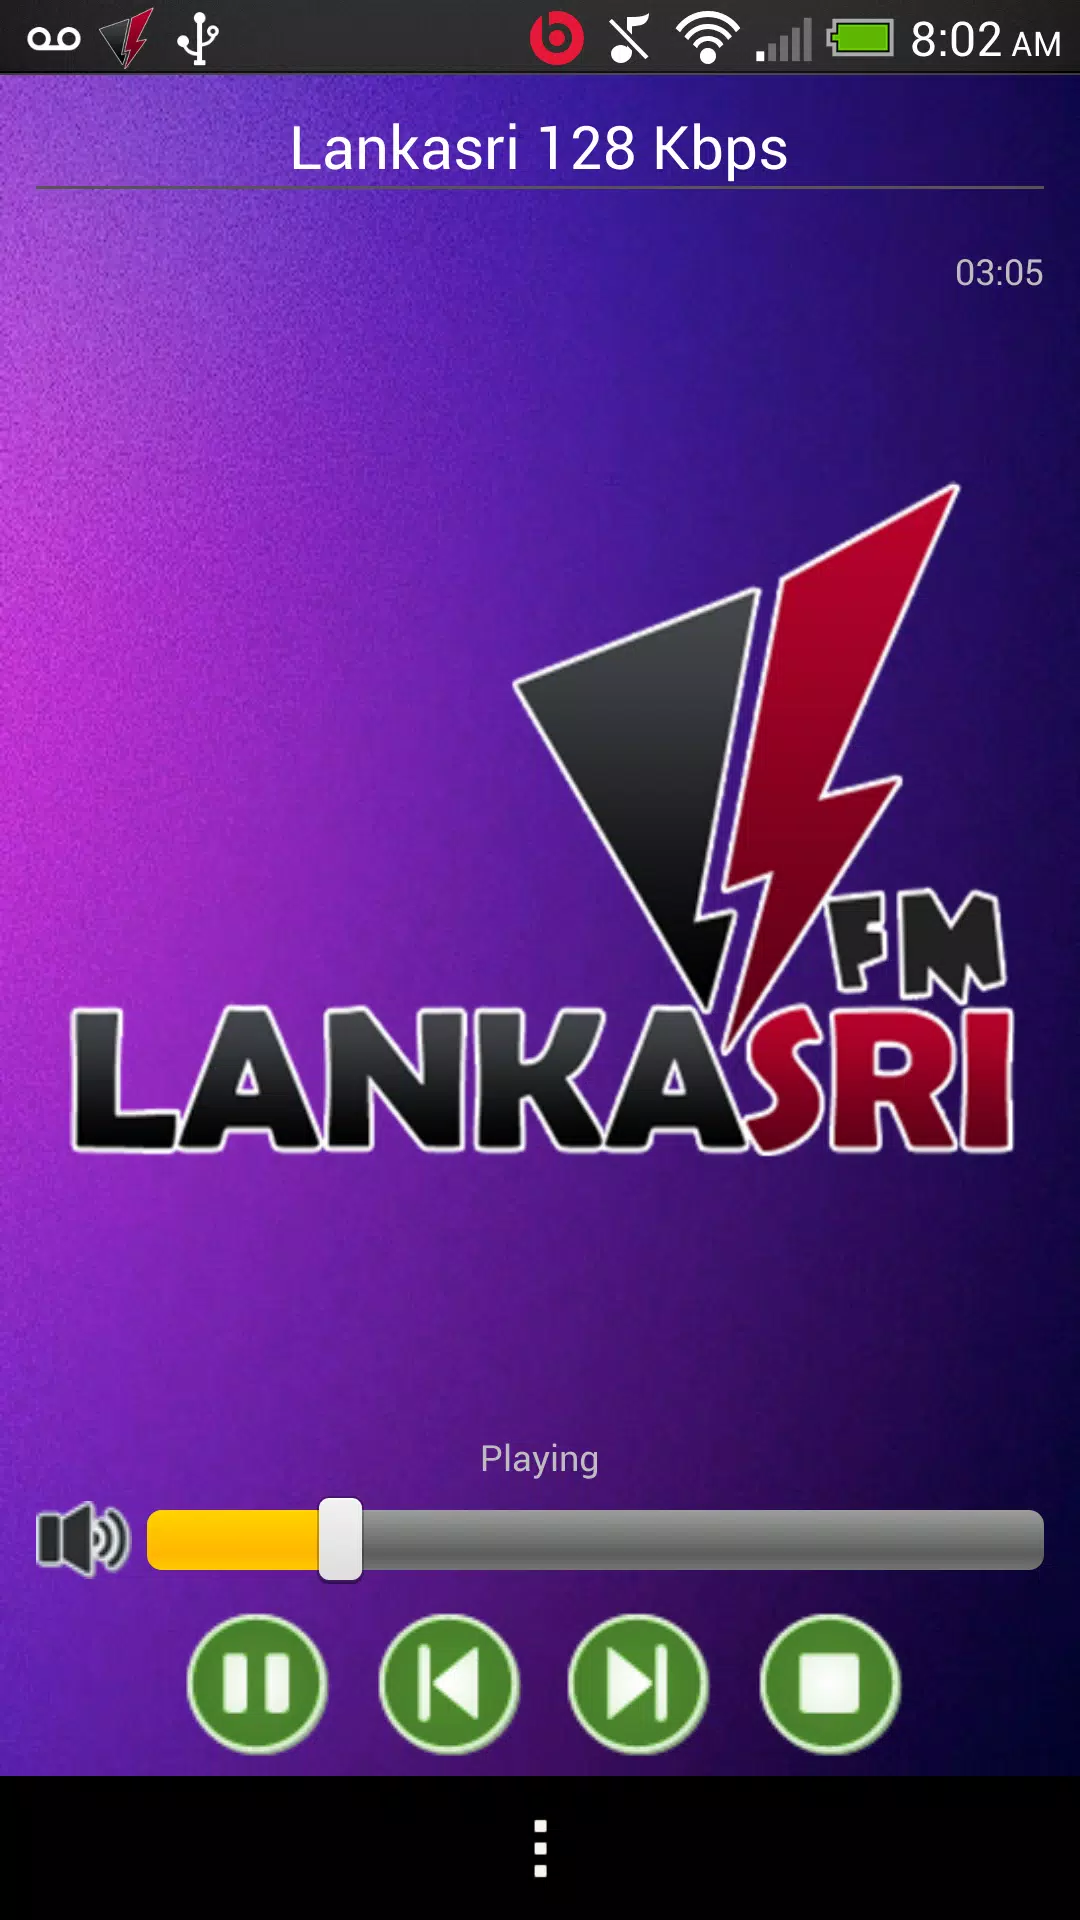 Lankasri FM for Android - APK Download